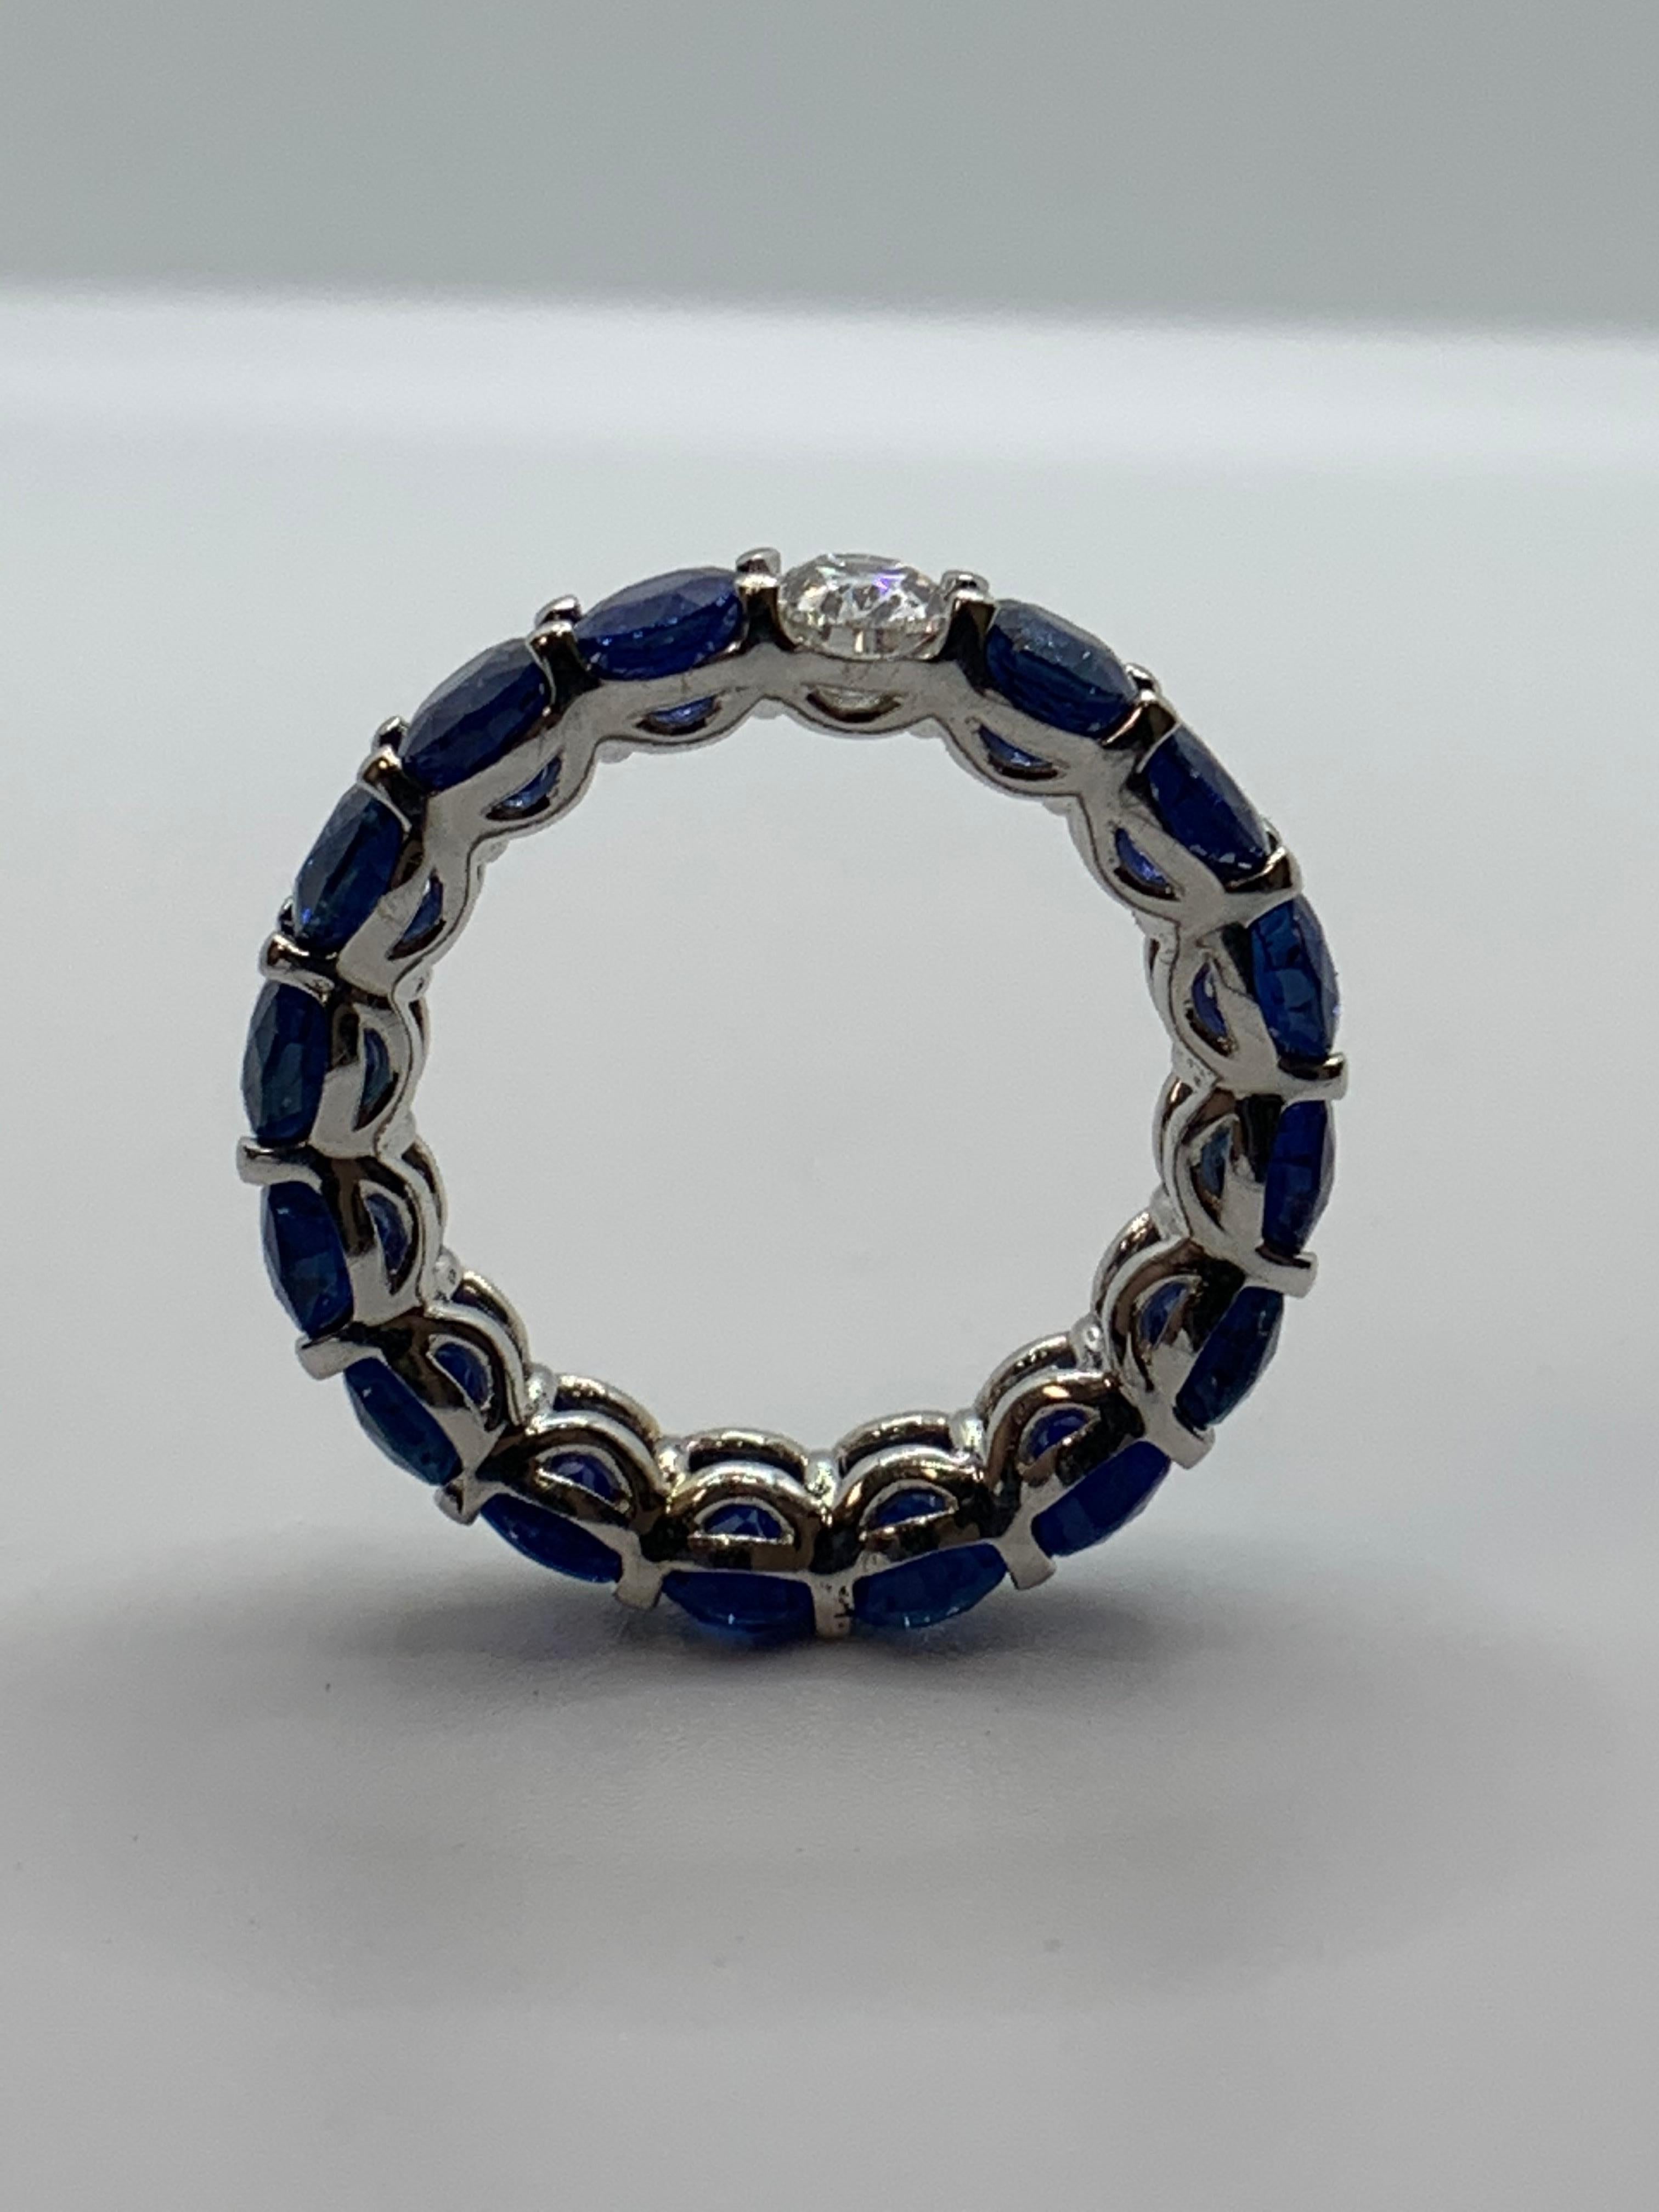 Beautiful and Forward Eternity Band.
Ring features 15 perfectly matched Oval shaped Sapphires weighing 8.49 Carats and
1 Oval Diamond weighing 0.47 Carats.
Set in 18 Karat White Gold.
Size 5.5.
Can be worn Diamond Side up or down.